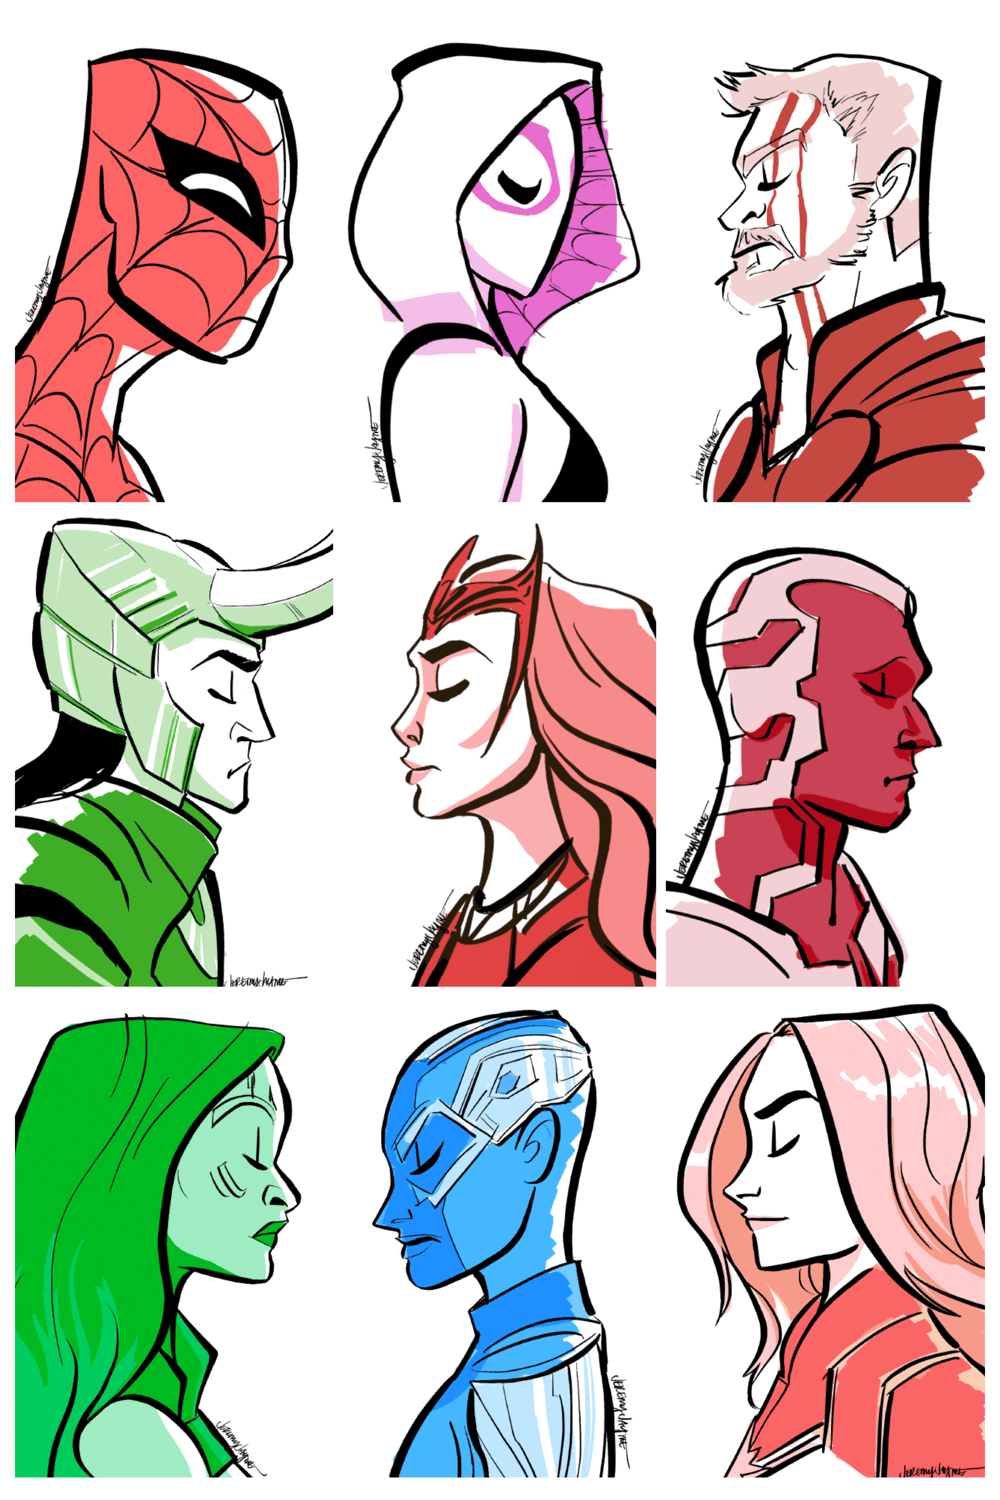 PROFILE SERIES - STAR WARS, MARVEL, OTHER